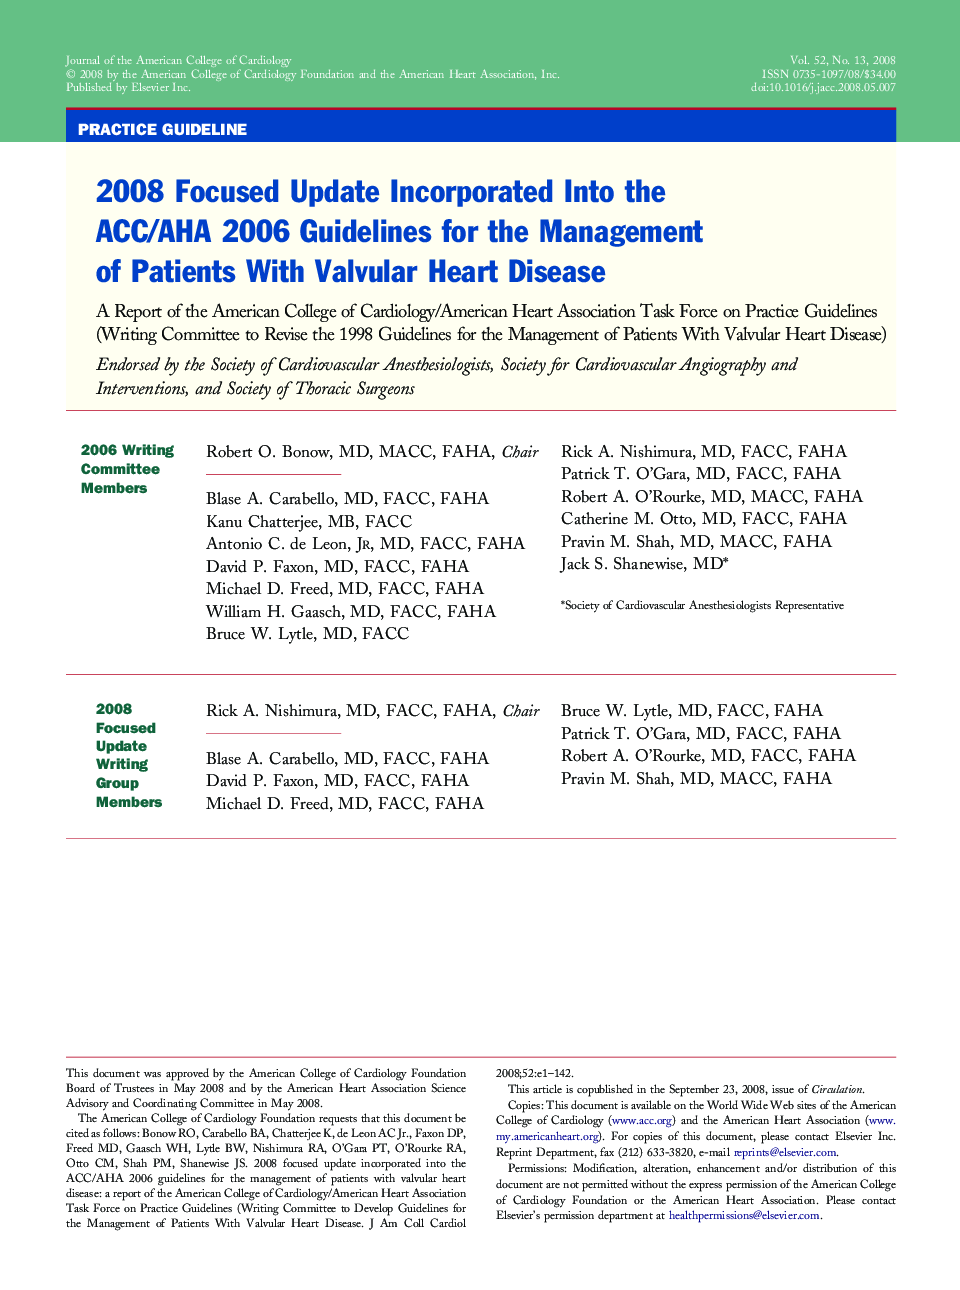 2008 Focused Update Incorporated Into the ACC/AHA 2006 Guidelines for the Management of Patients With Valvular Heart Disease